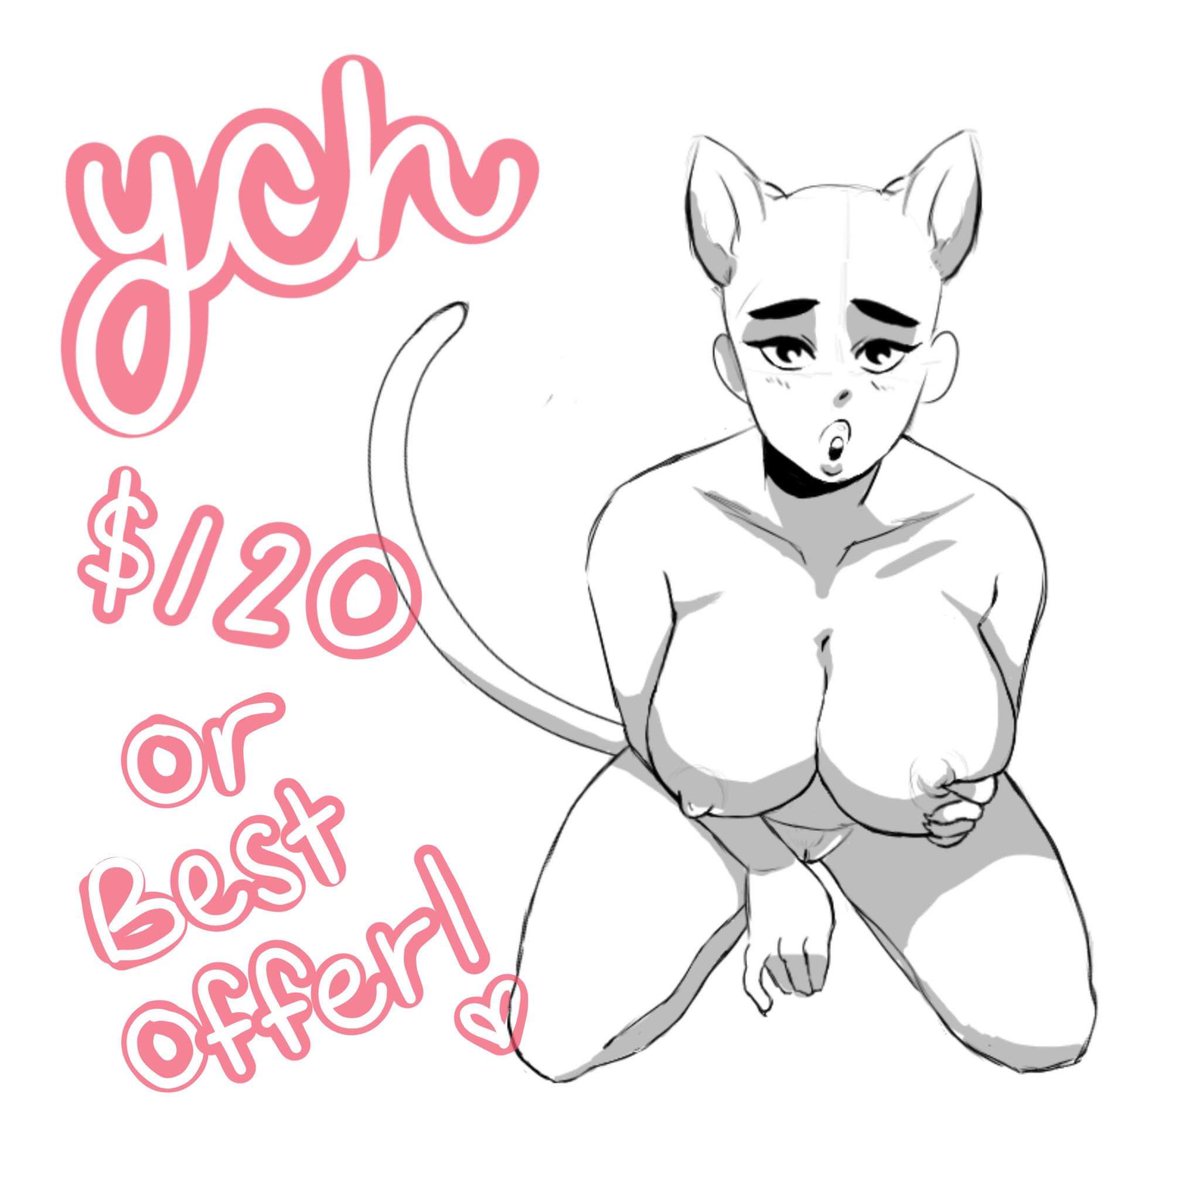 REMINDER!! Good Girl YCH 100-120$ Can be Neko, Furry or human characters! Will add a penis just ask. Paypal only please. First come first served! Complicated characters will be extra! Retweets are appreciated! #YCH #furry #neko #art #Nsfwart #Nsfw